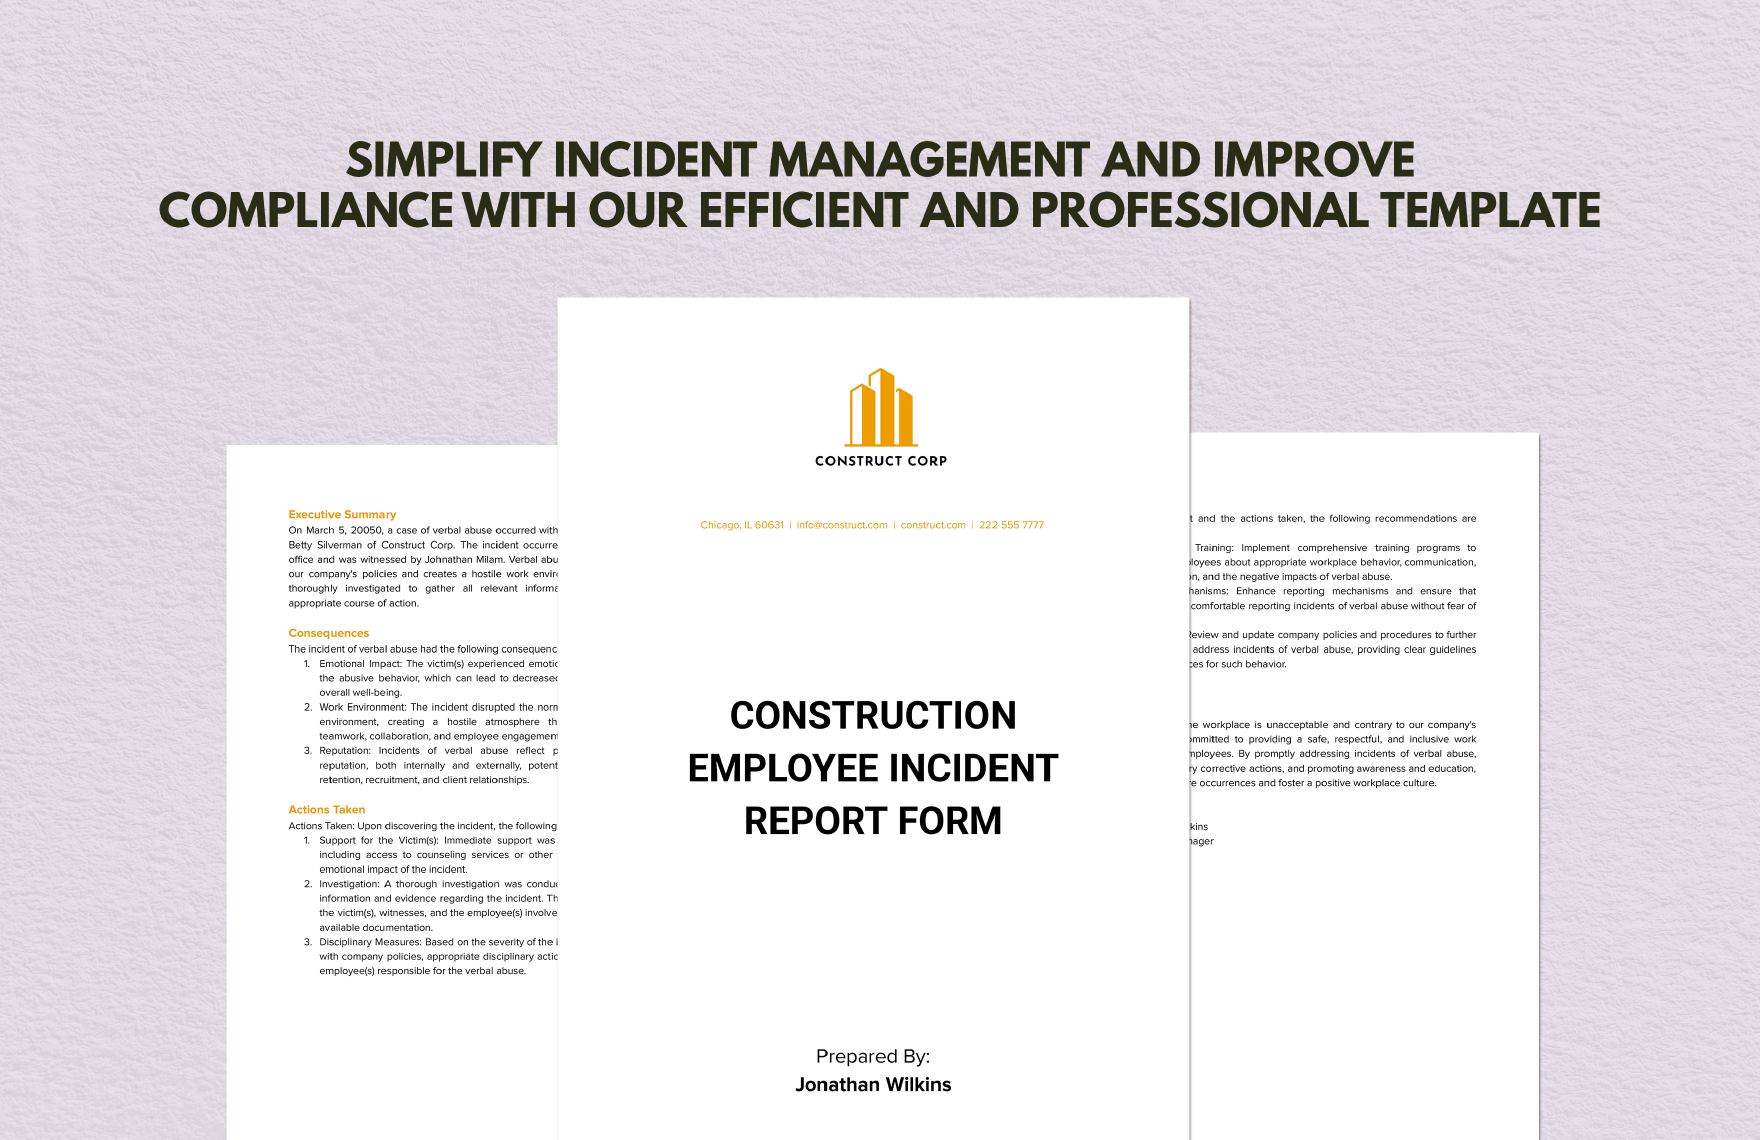 Construction Employee Incident Report Form 